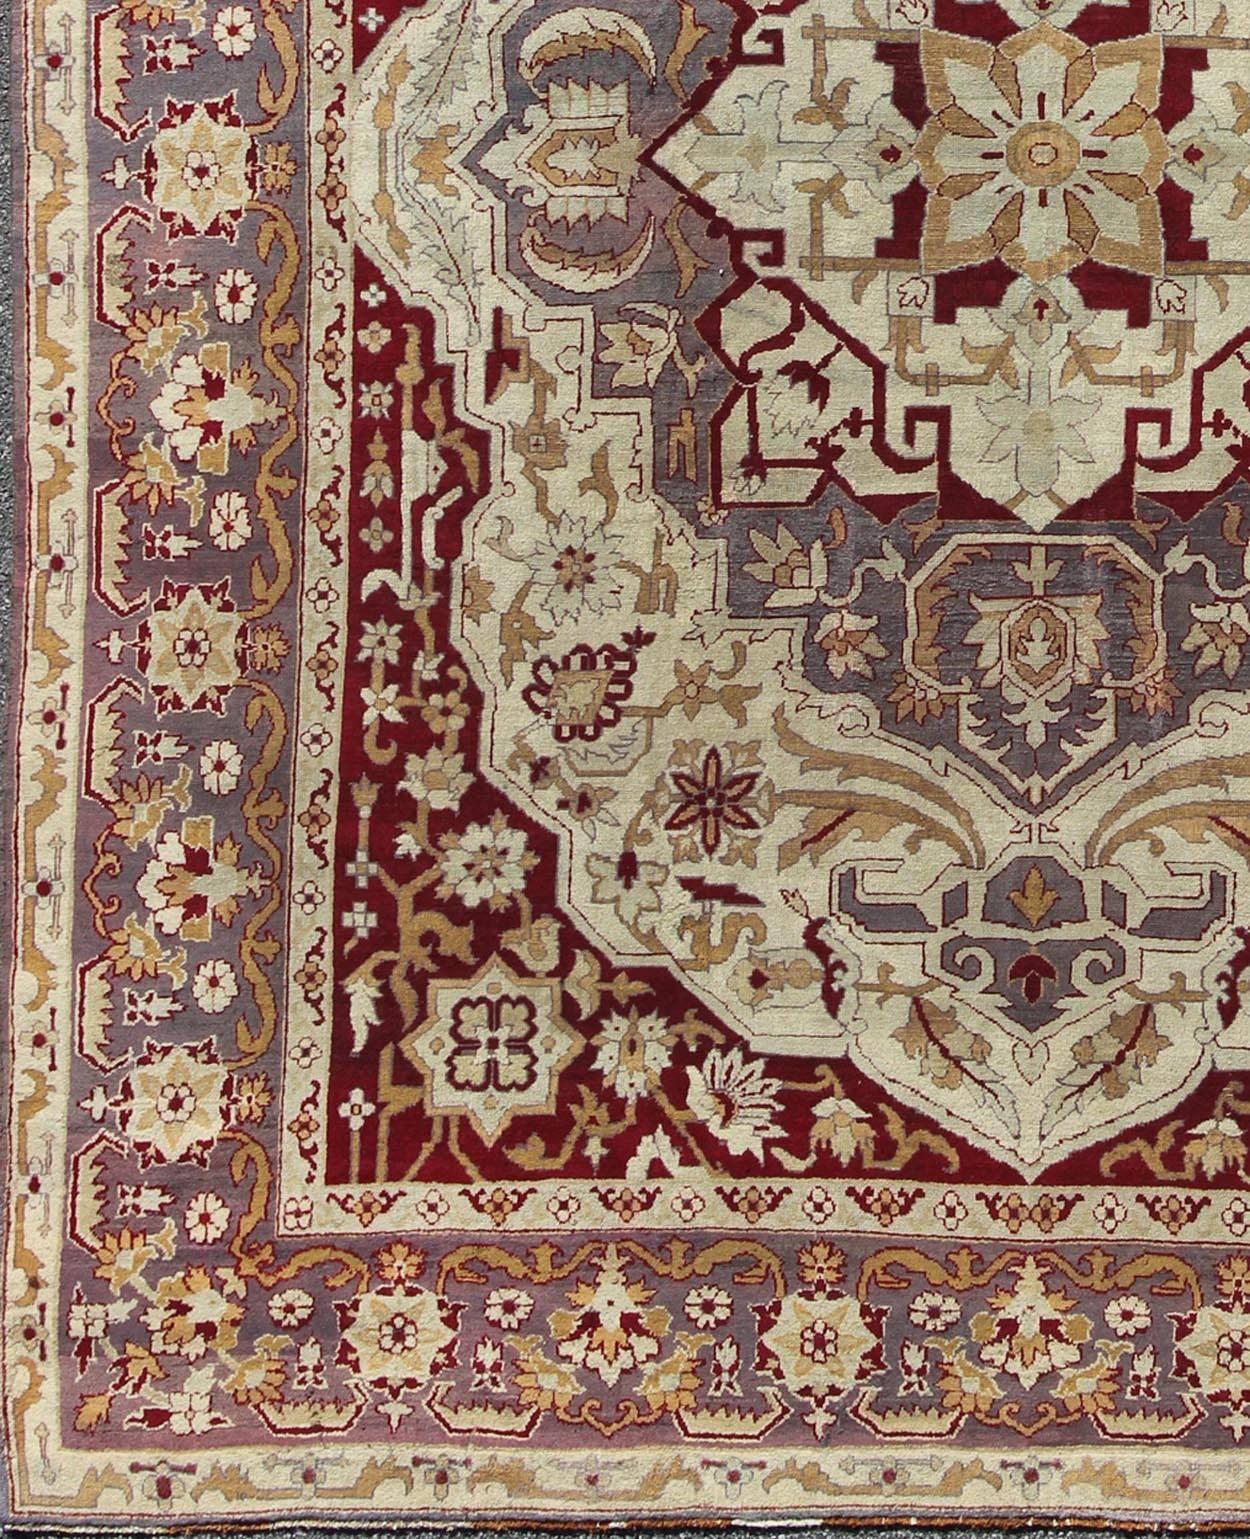 Antique 19th Century Indian Agra Carpet with a Floral Medallion Design in Cream, Maroon, Gold, and Gray/Light Purple. Keivan Woven Arts/ Rug/D-0101, country of origin / type: India / Agra, circa 1880's.  Antique Agra Carpet
Measures: 10' x 12'5